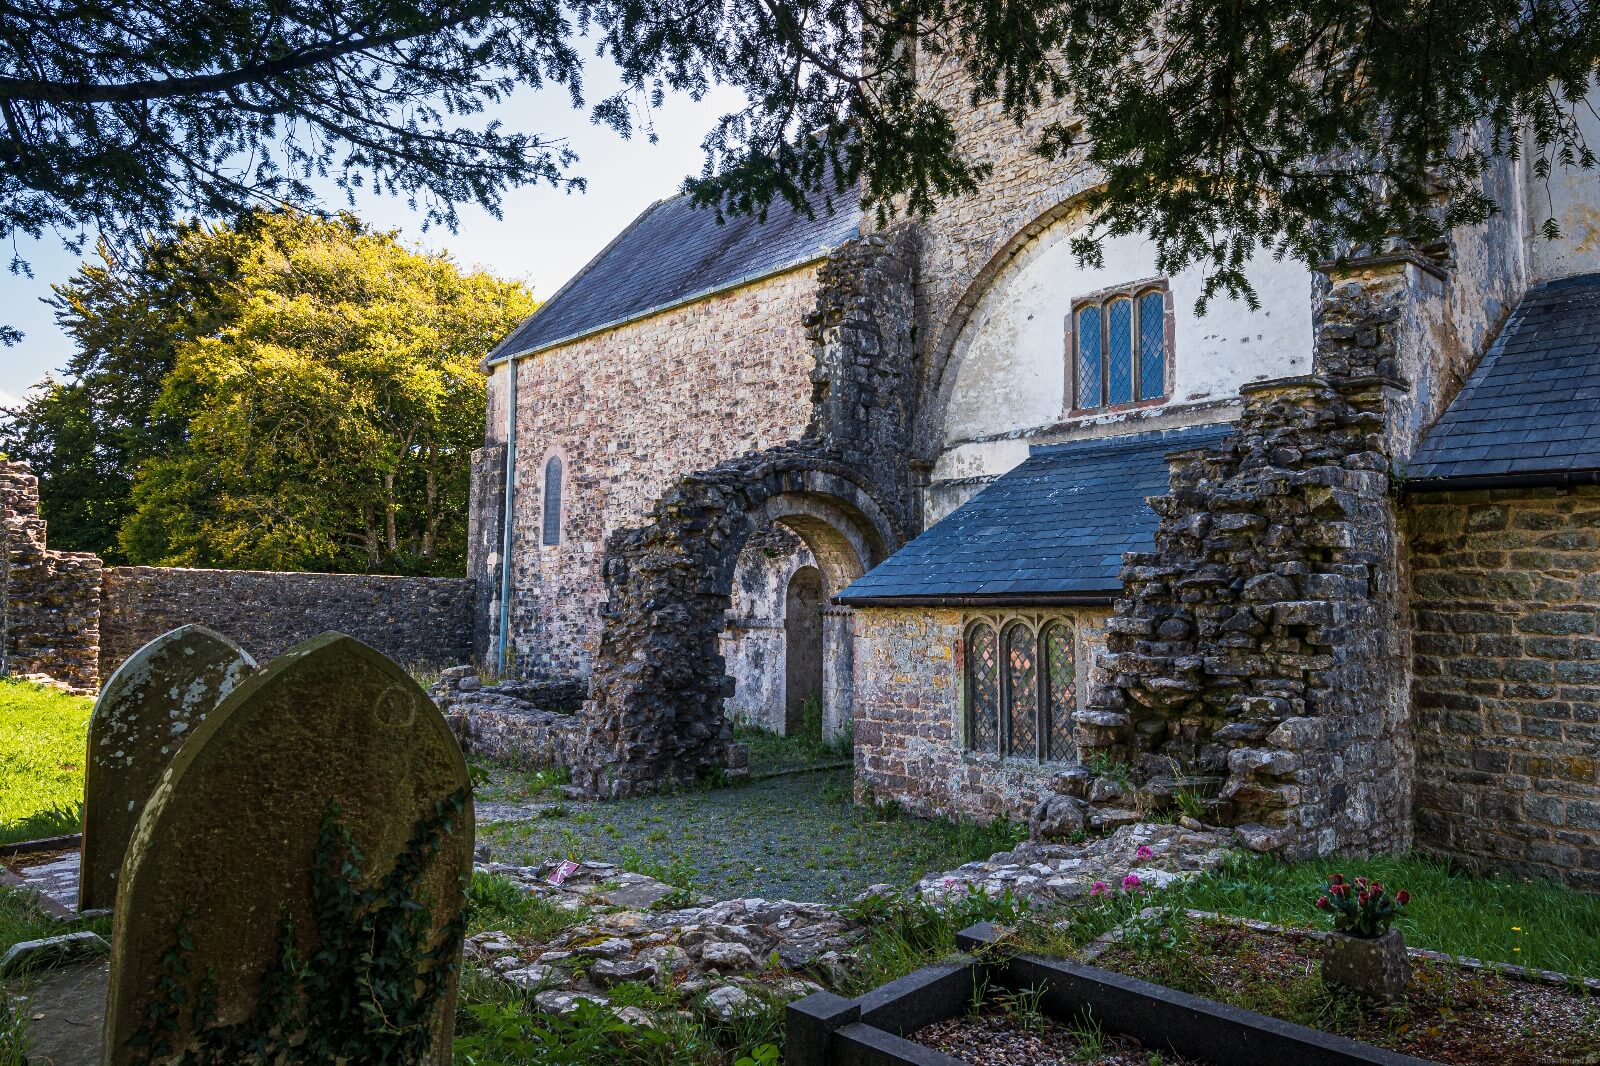 Image of Ewenny Priory by Steven Godwin